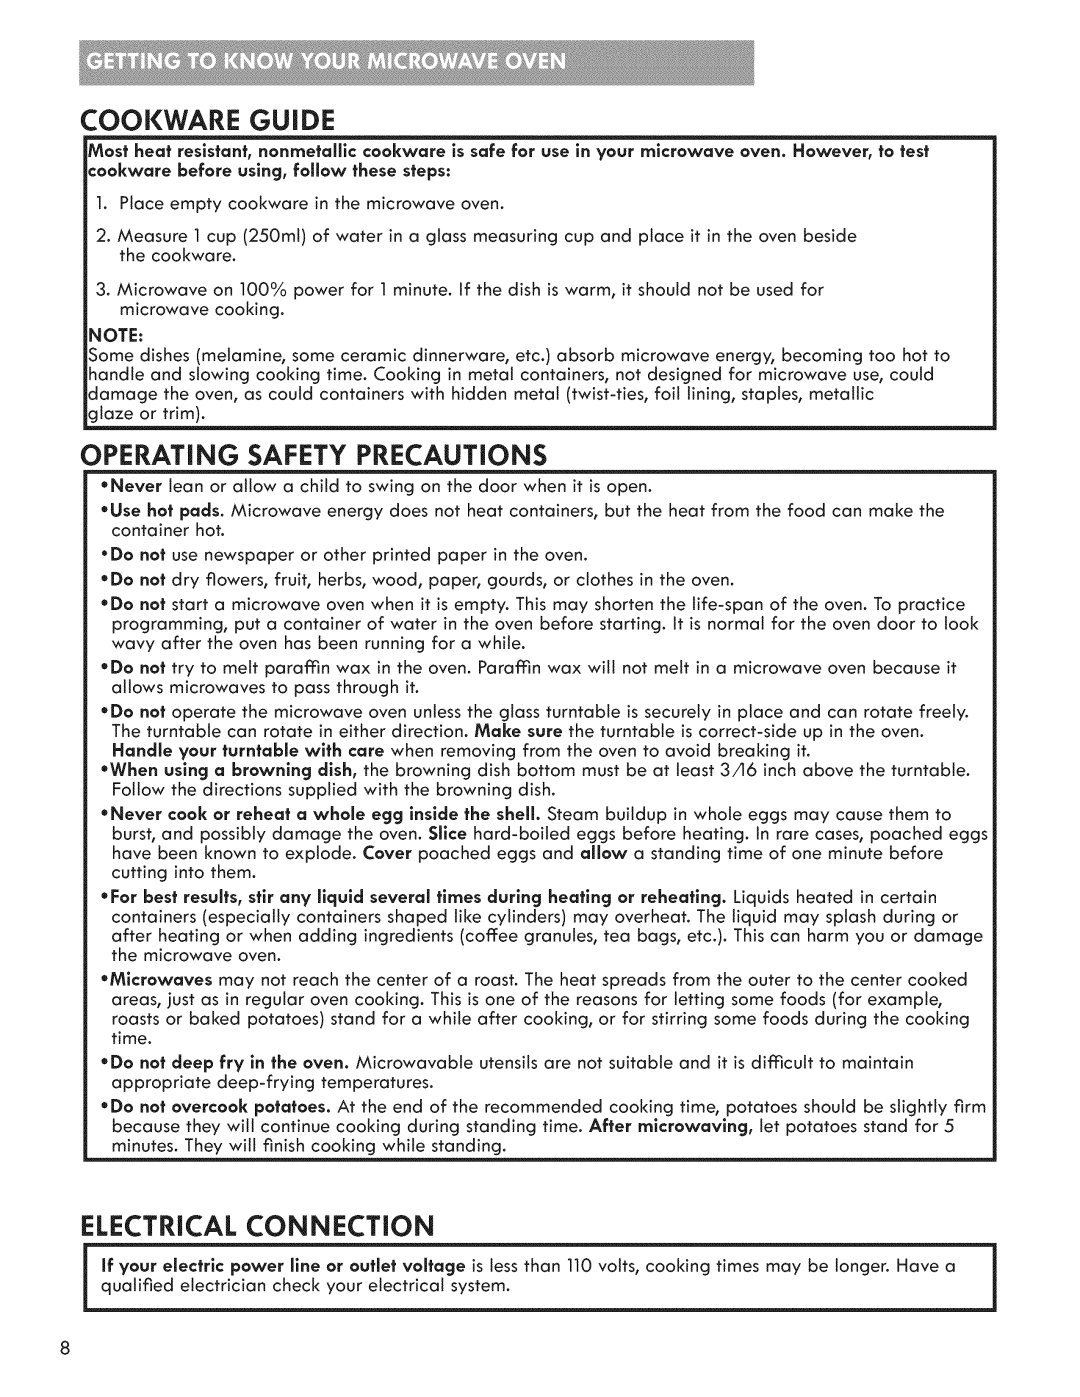 Kenmore 721.7915 manual Cookware Guide, Operating Safety Precautions, Electrical Connection 